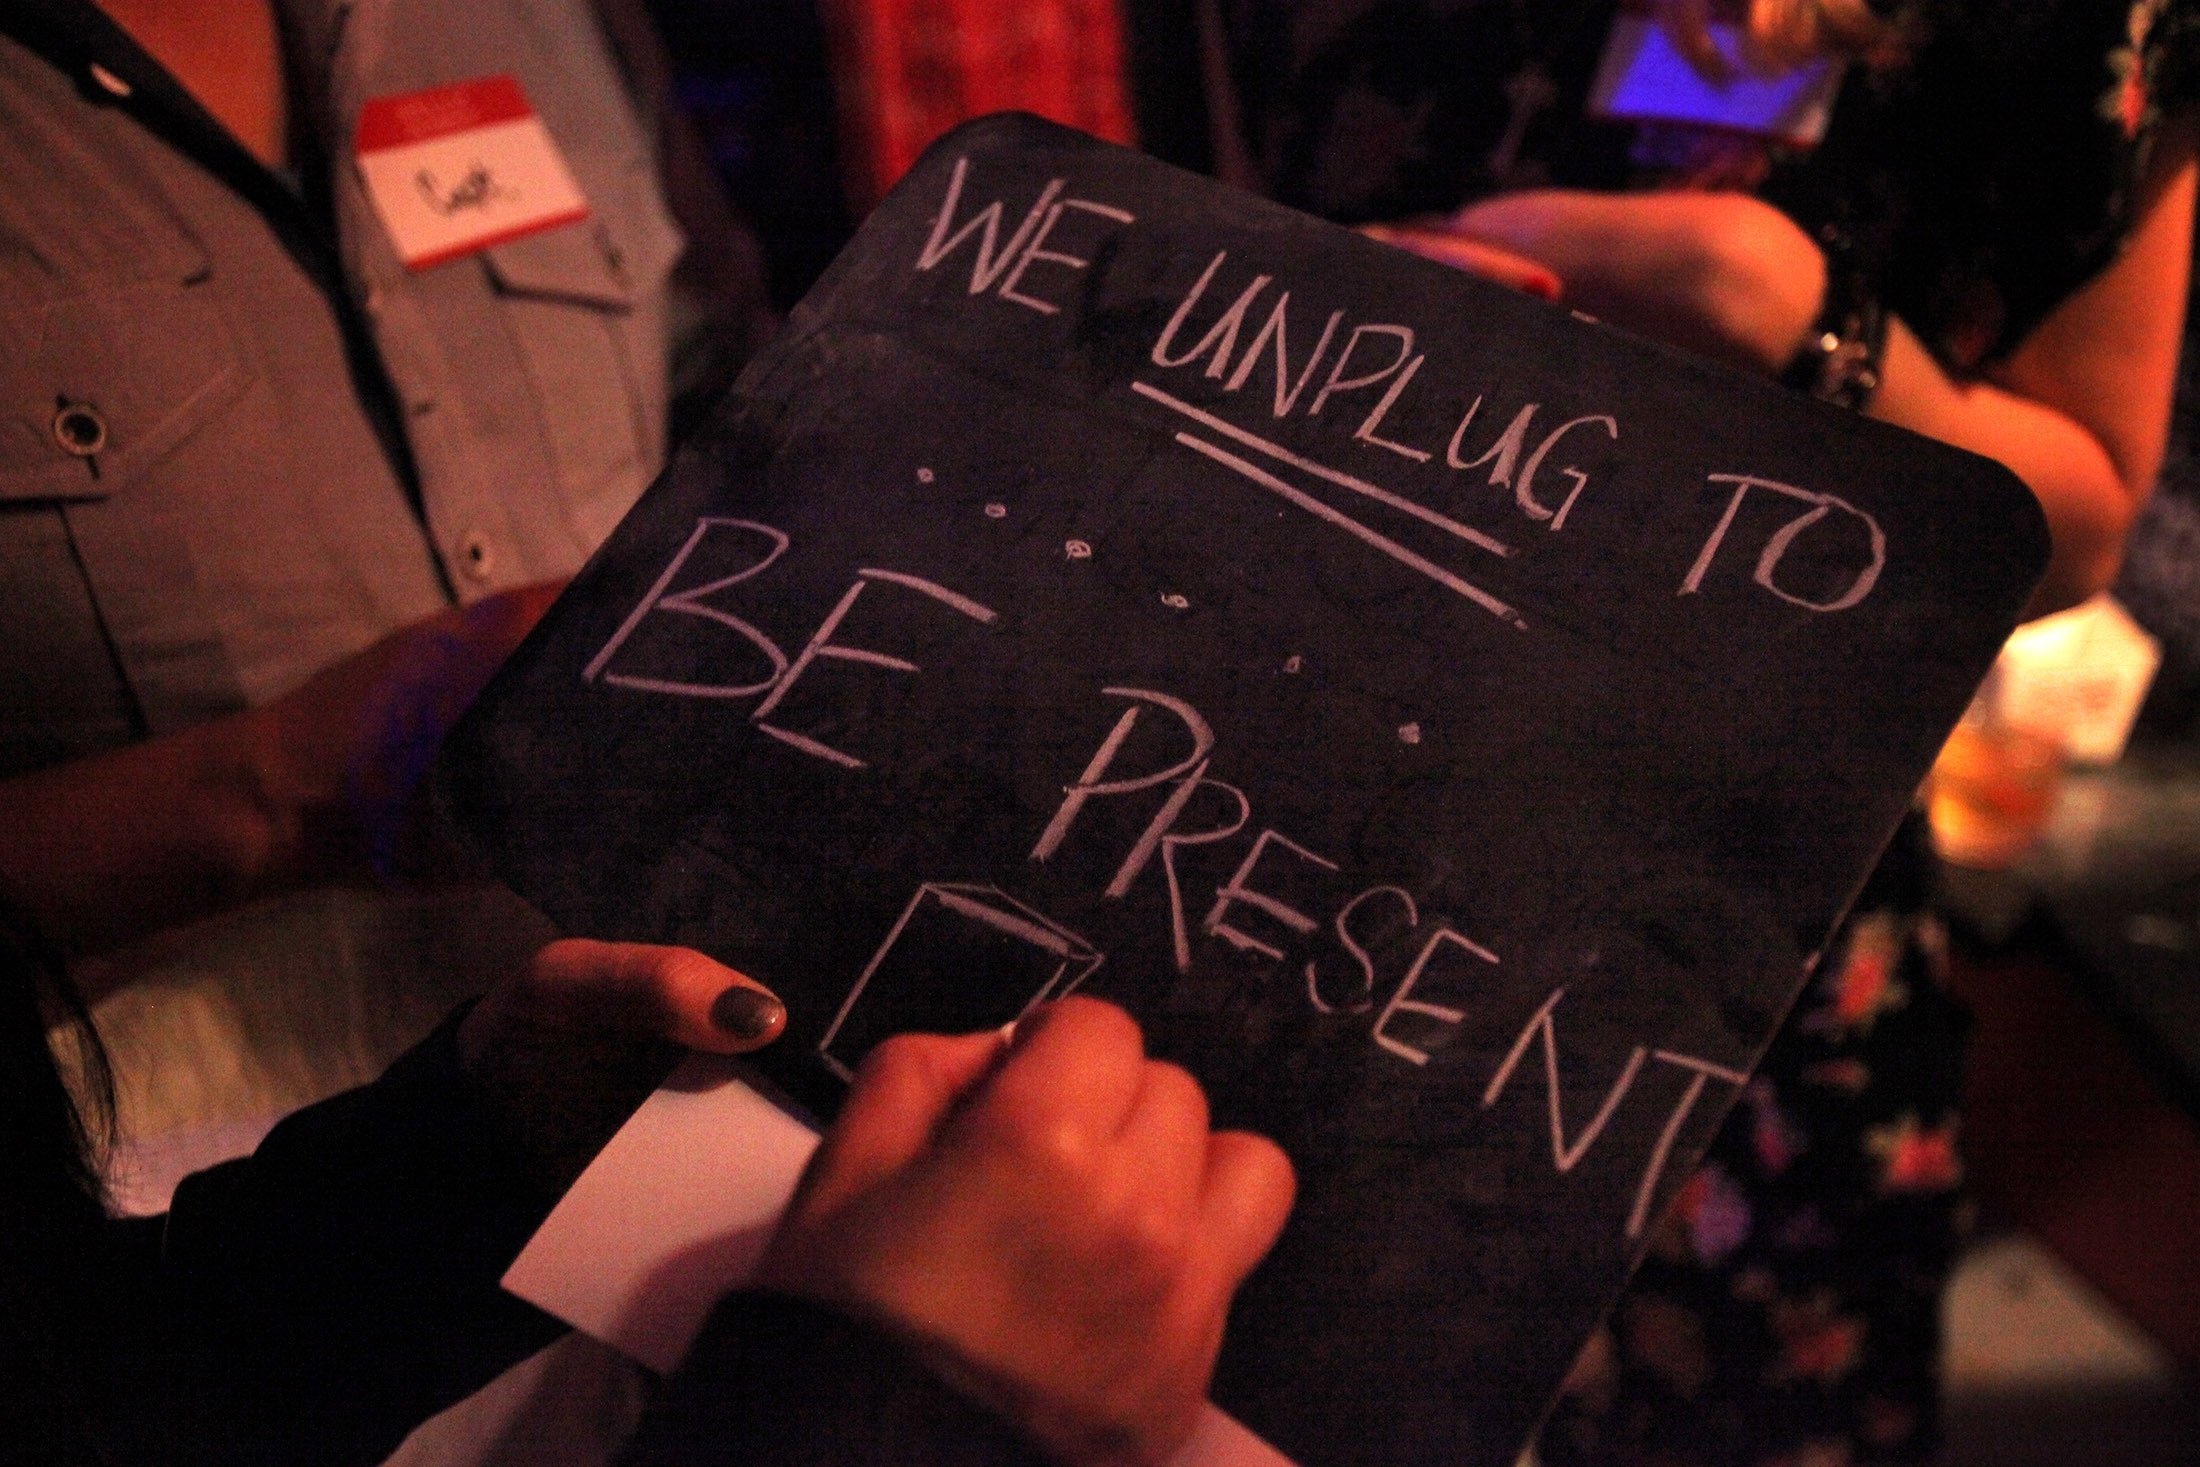 An attendant makes a sign that says “We unplug to be present,” at the Unplug SF event at Broadway Studios in North Beach in San Francisco, California, U.S., March 7, 2014. (Getty Images)